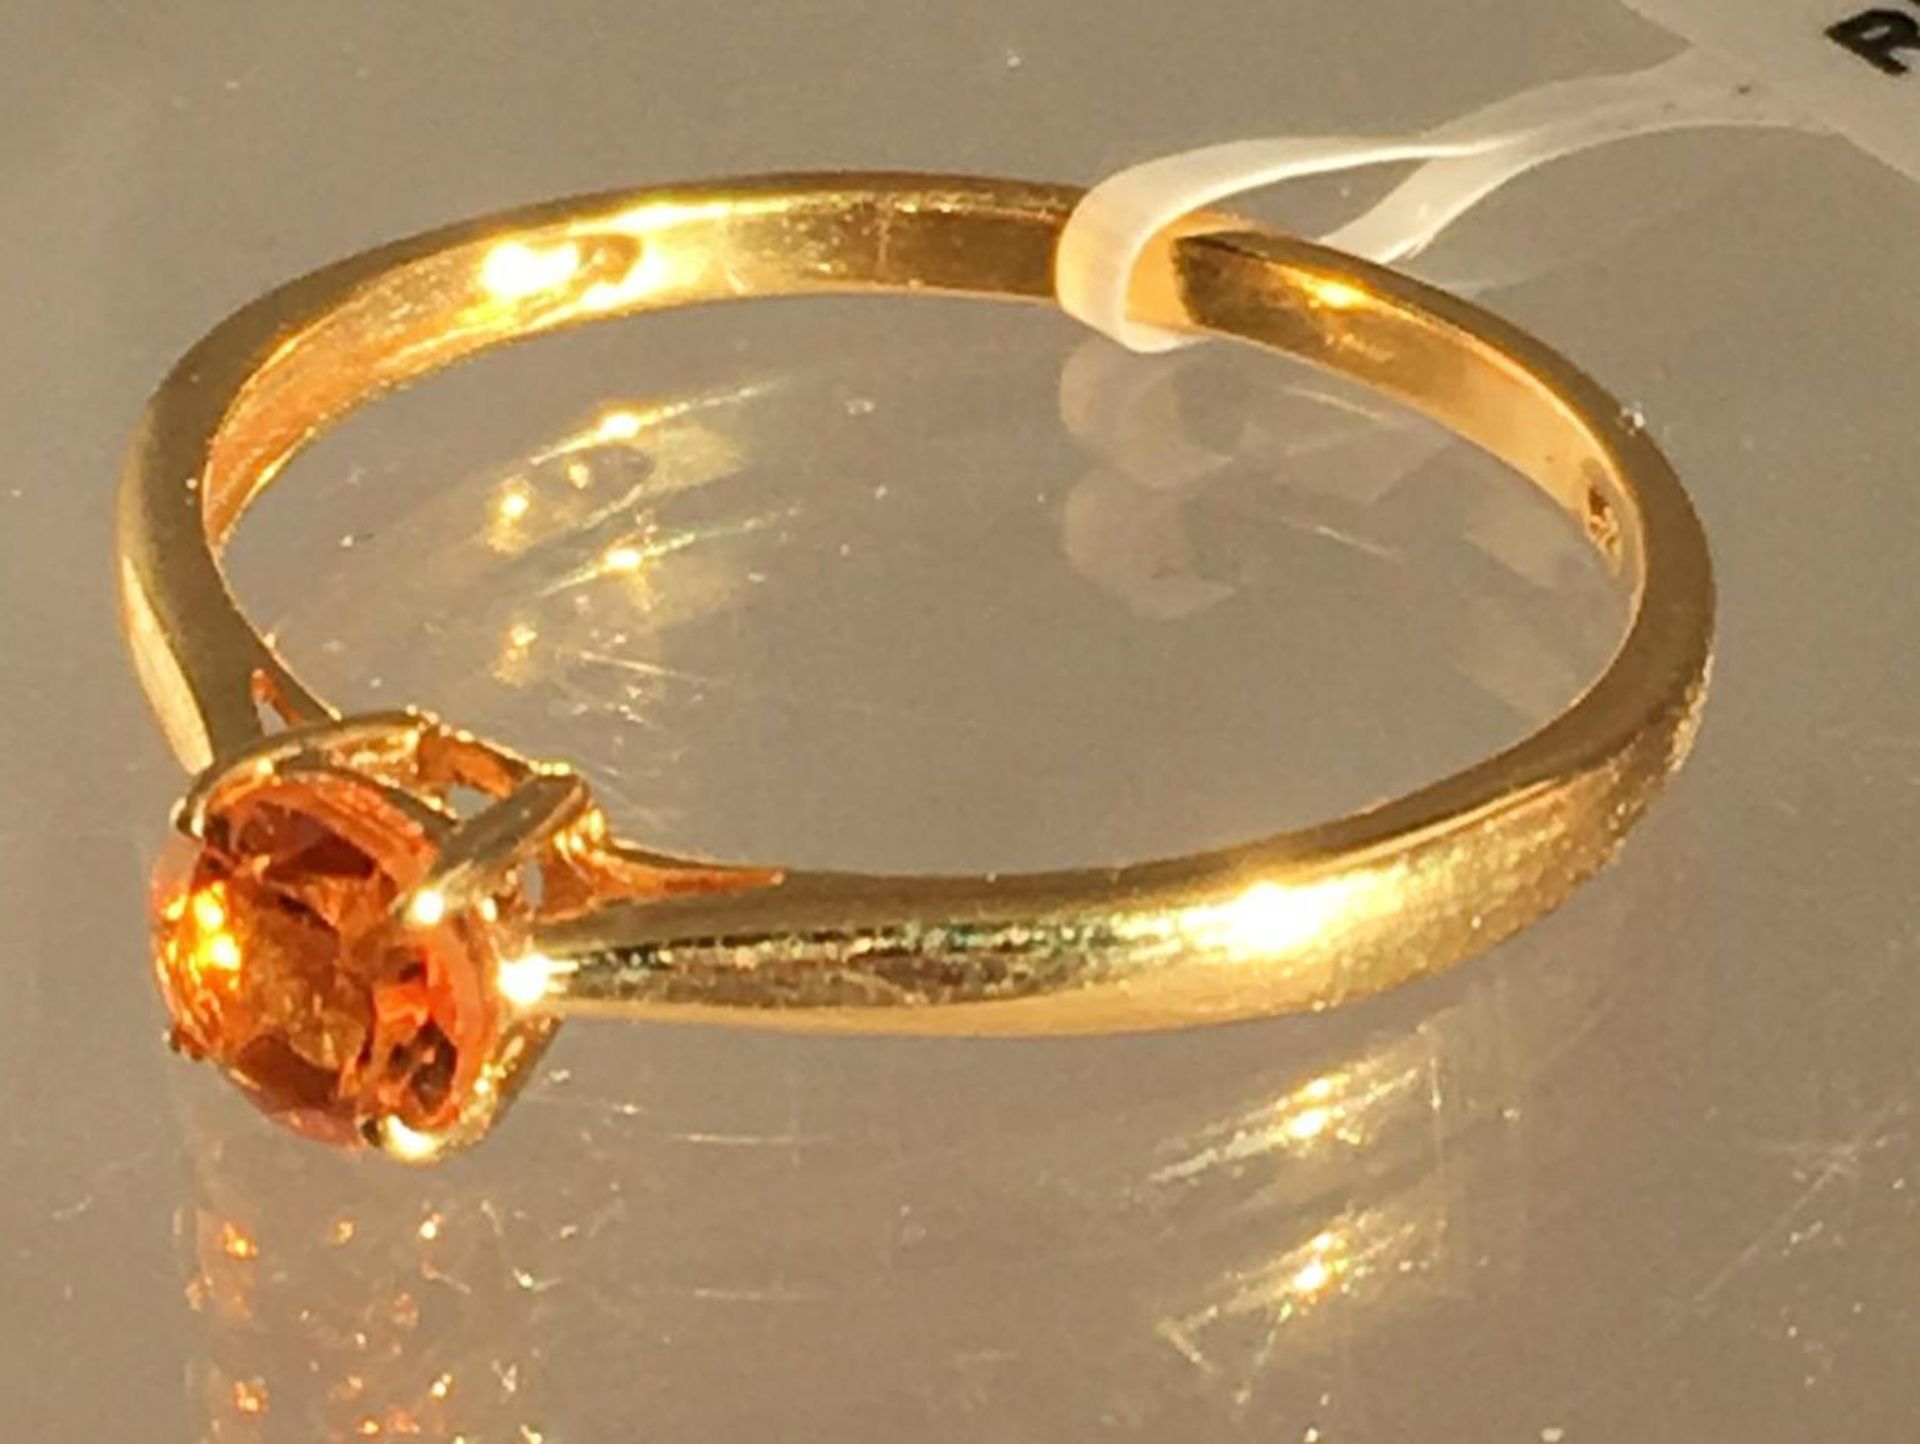 Citrine Solitaire Ring in 14K Gold Over 925 Silver - Size U. Includes free UK delivery